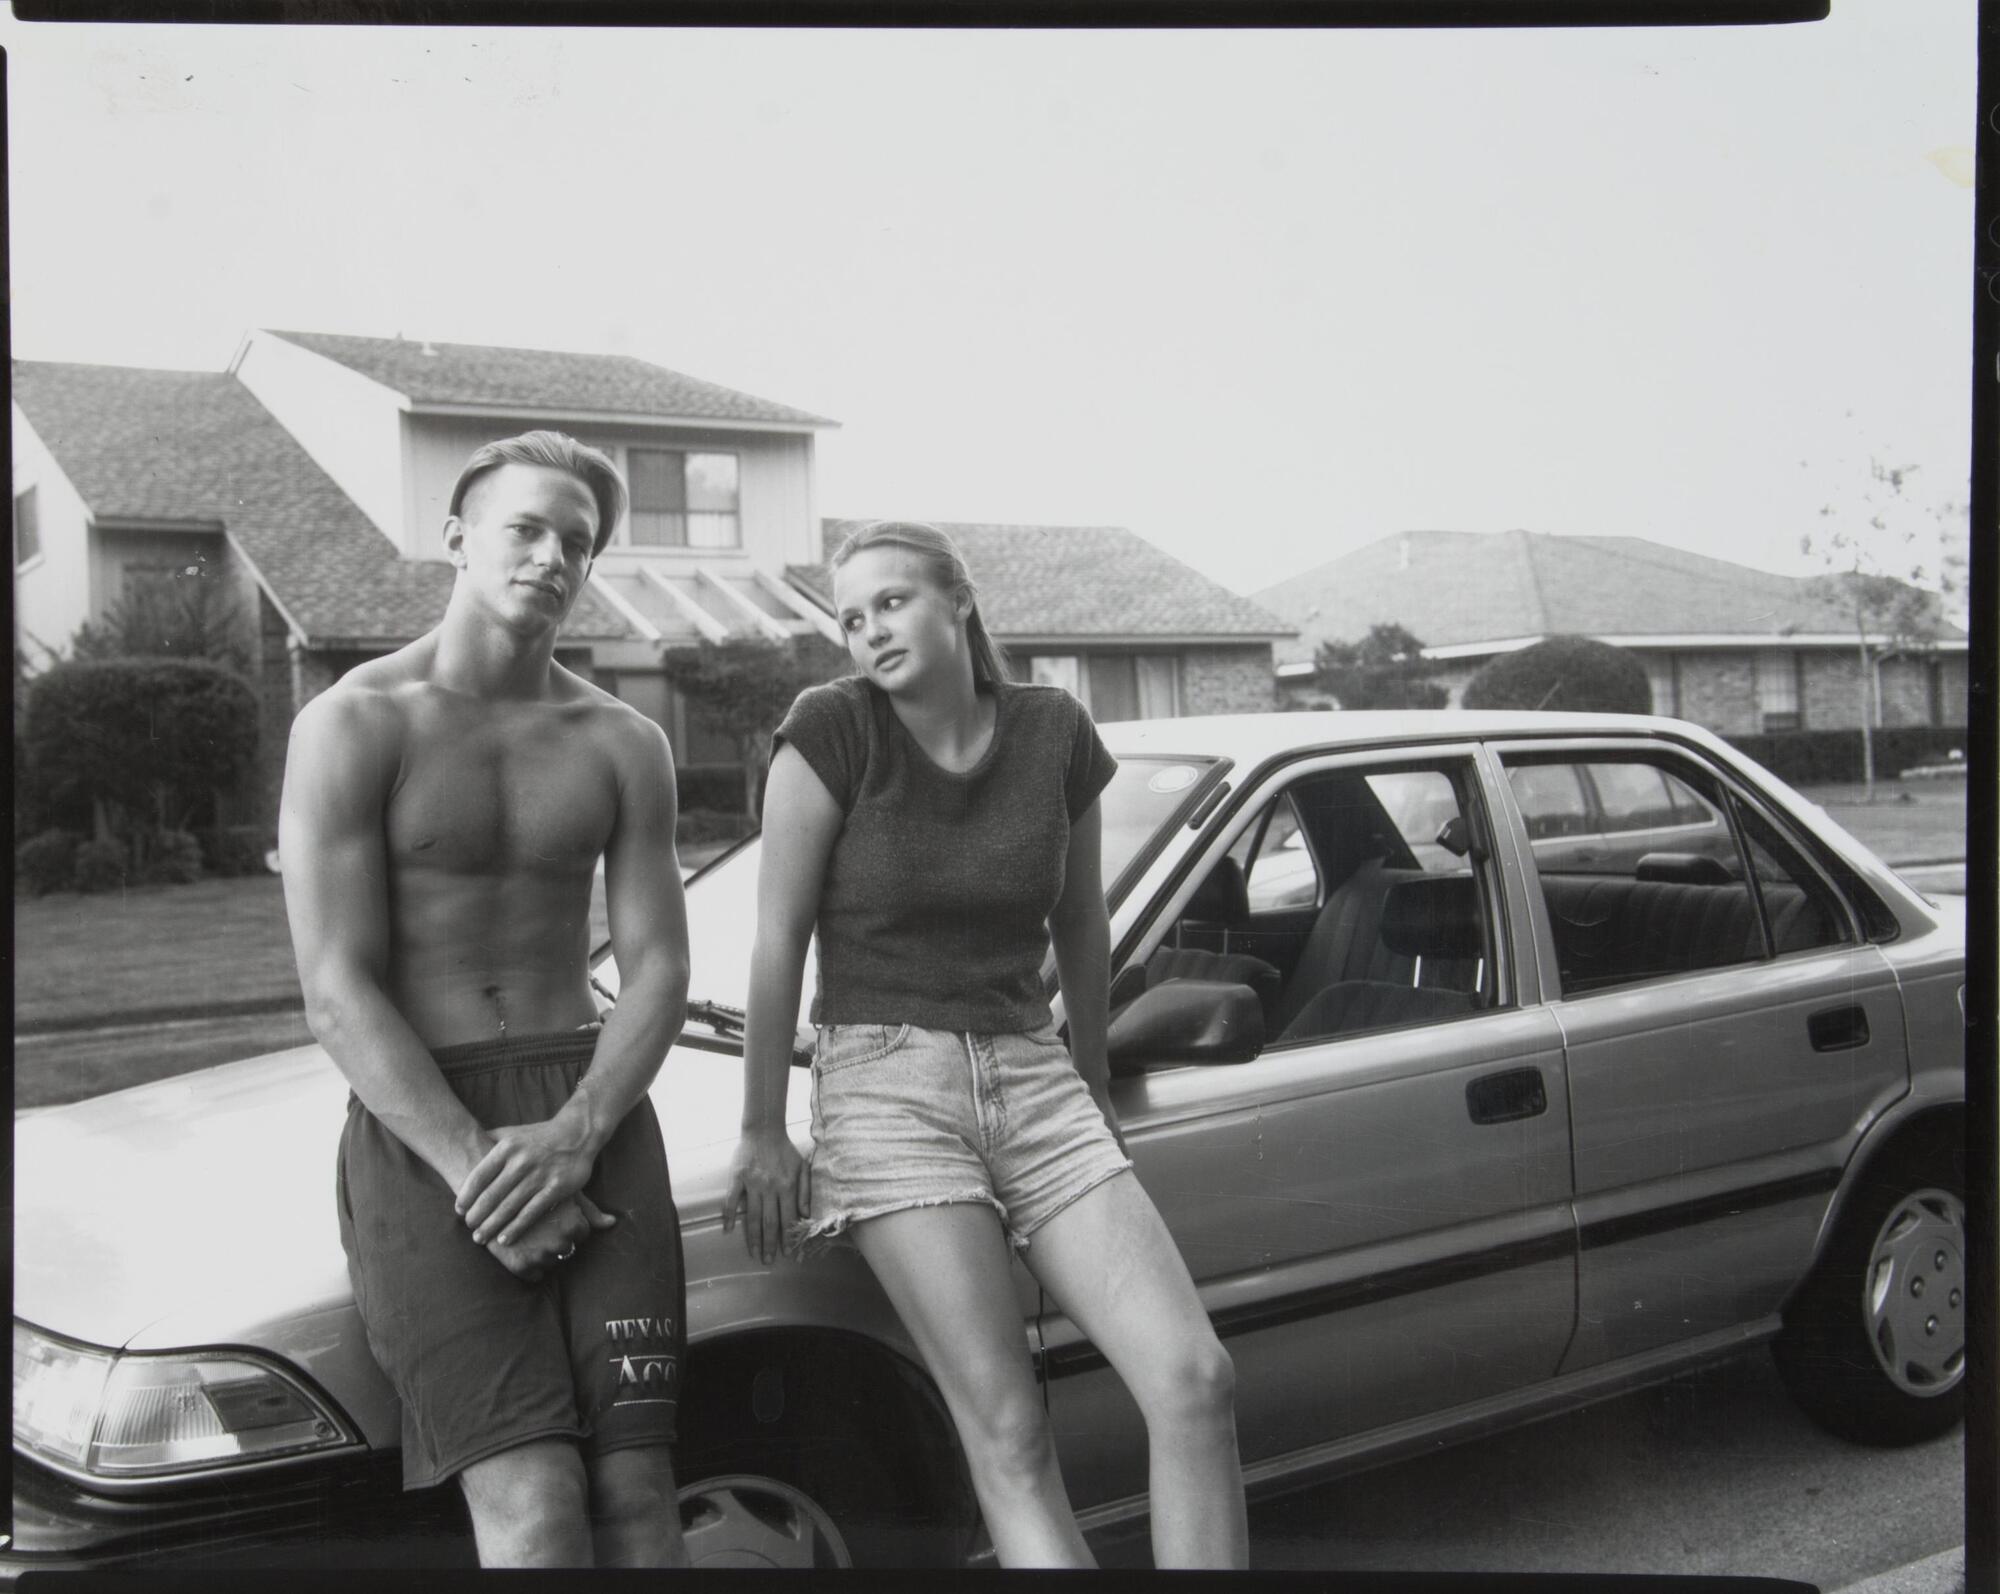 A boy and girl up against a car, girl looking at boy, boy looking straight ahead.